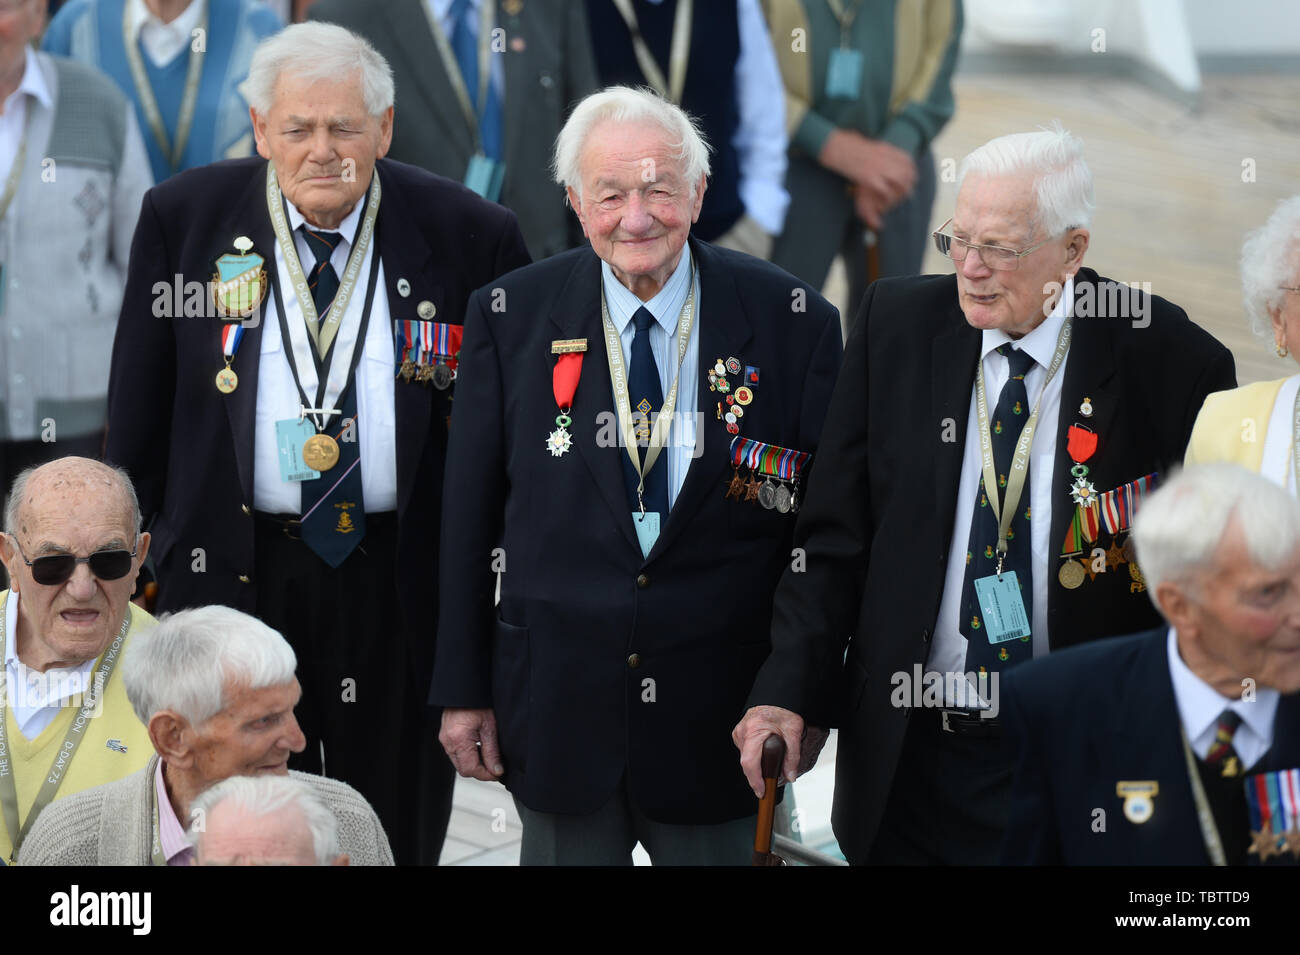 D-Day veterans travelling on board the MV Boudicca gather for a group photo as they arrive into Dunkirk, France, on the second day of a trip arranged by the Royal British Legion to mark the 75th anniversary of D-Day. Stock Photo